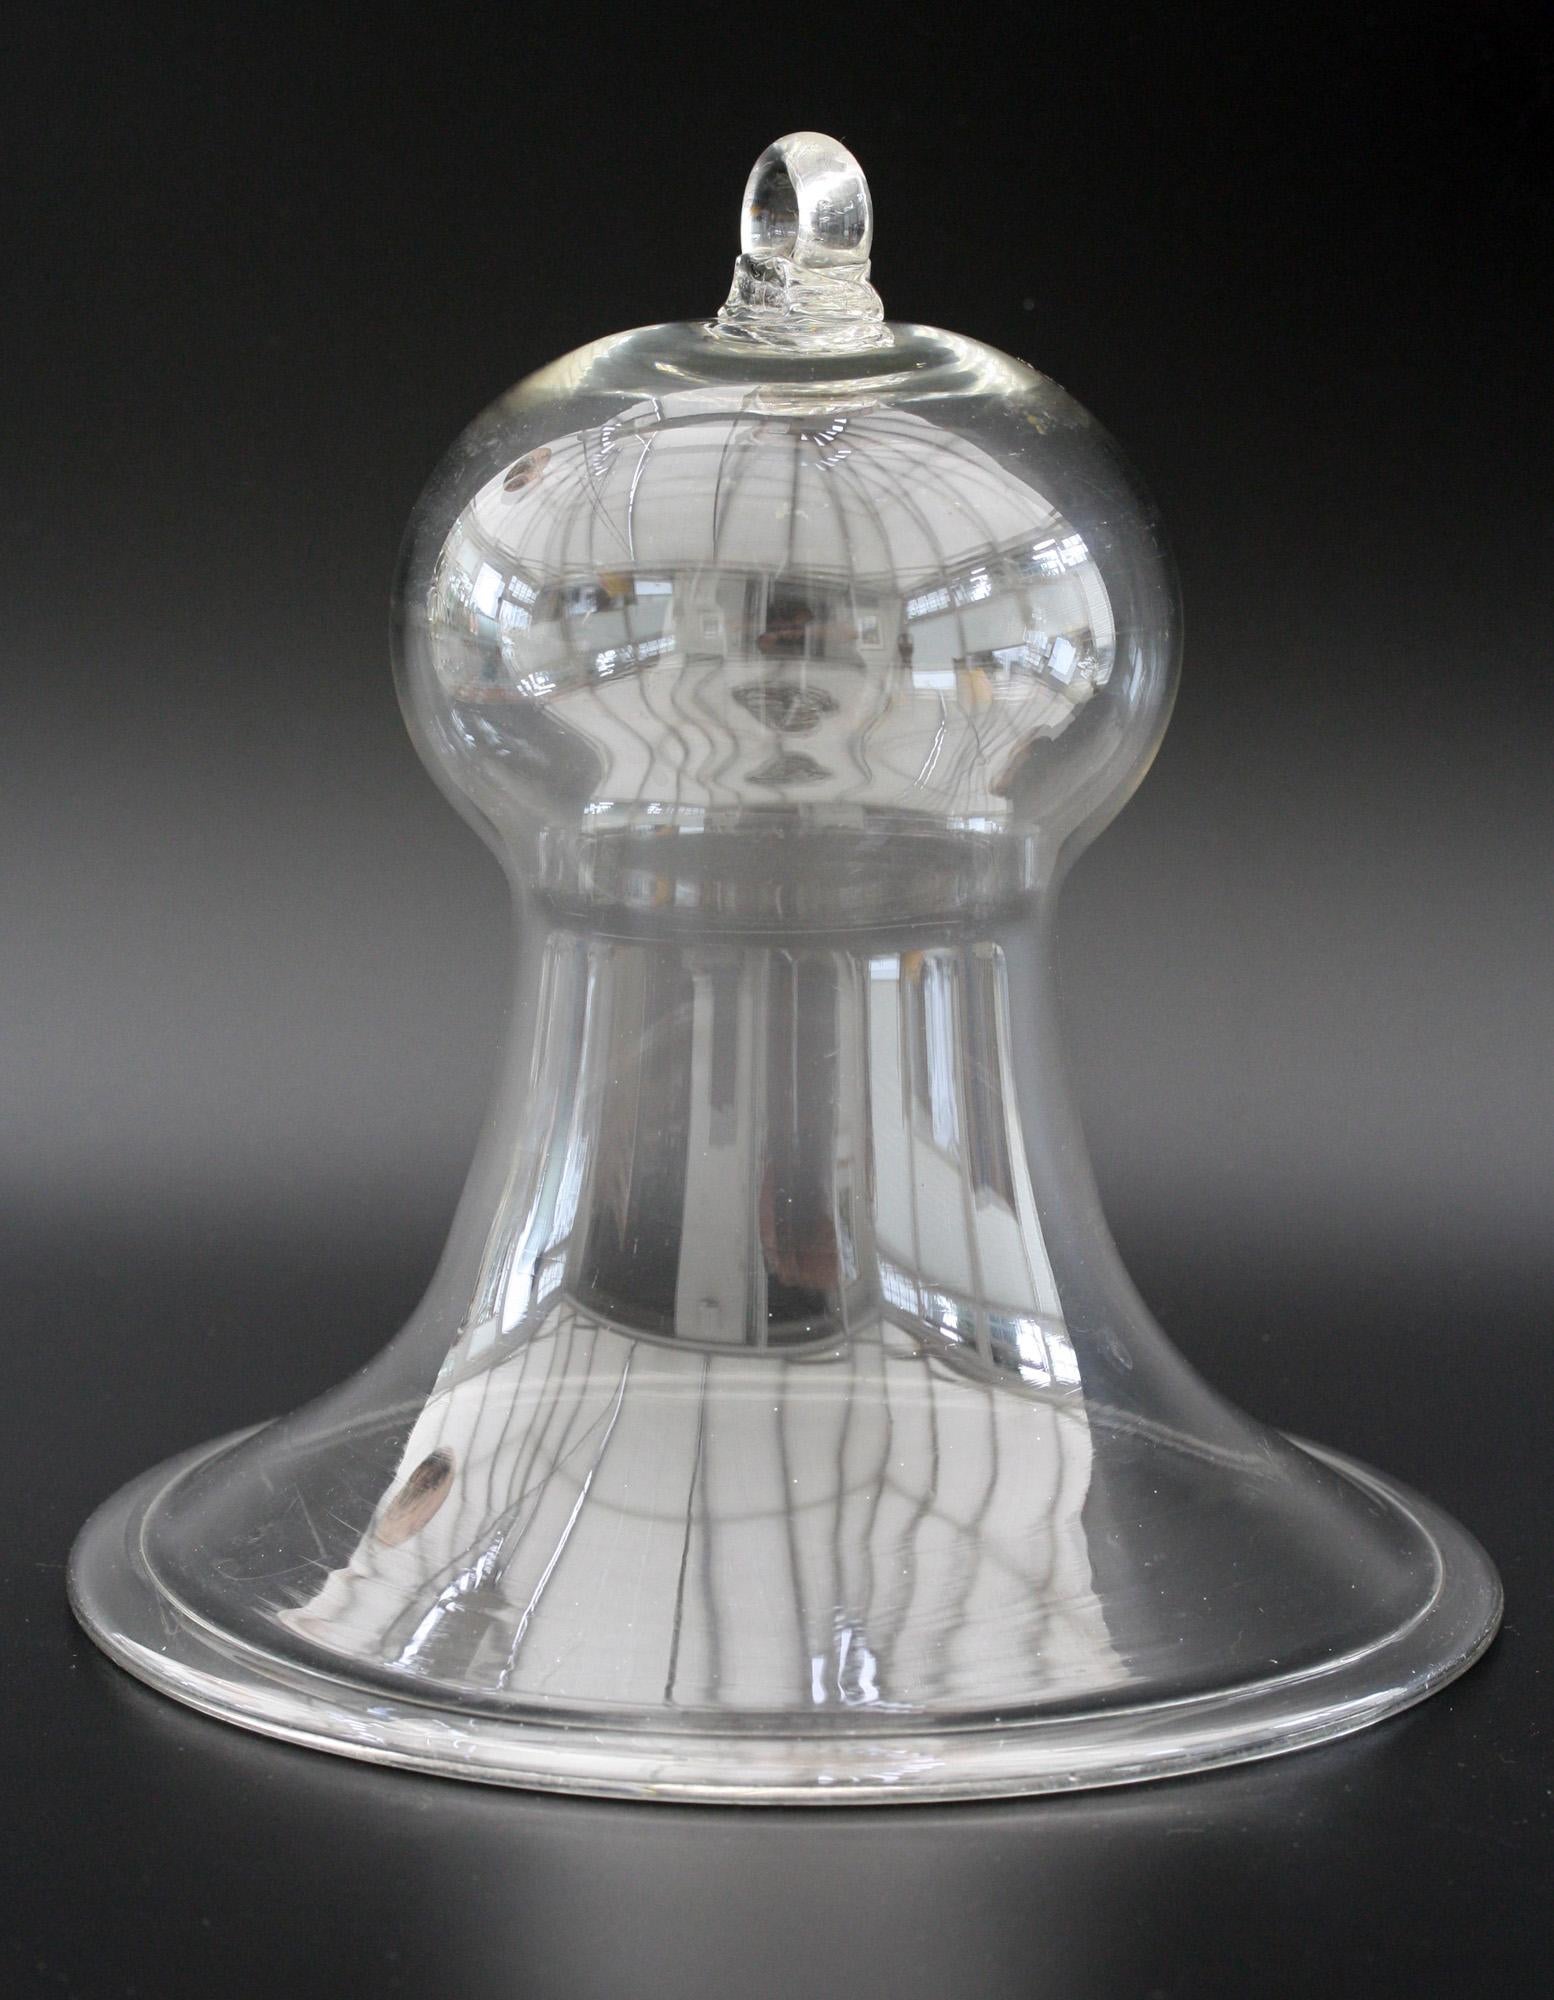 A fine English early Victorian clear glass smoke bell probably dating from circa 1850. Used to capture the smoke from oil lamps the bell would be hung suspended from the ceiling above the oil lamp preventing the smoke for dispersing and causing